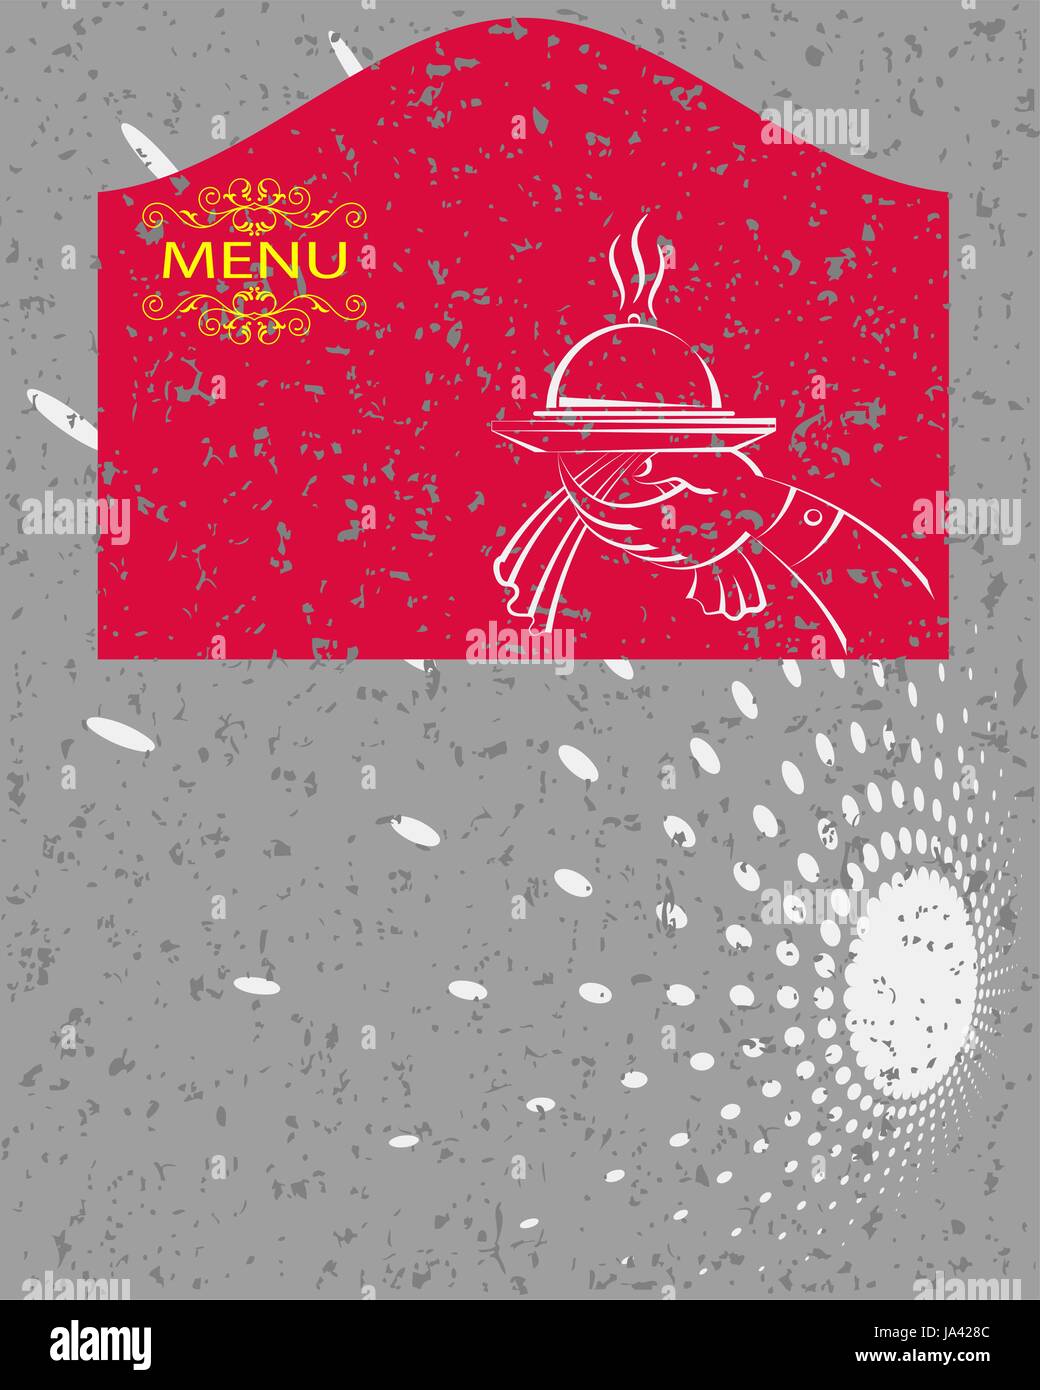 Hotel menu card with food Stock Vector Images - Alamy